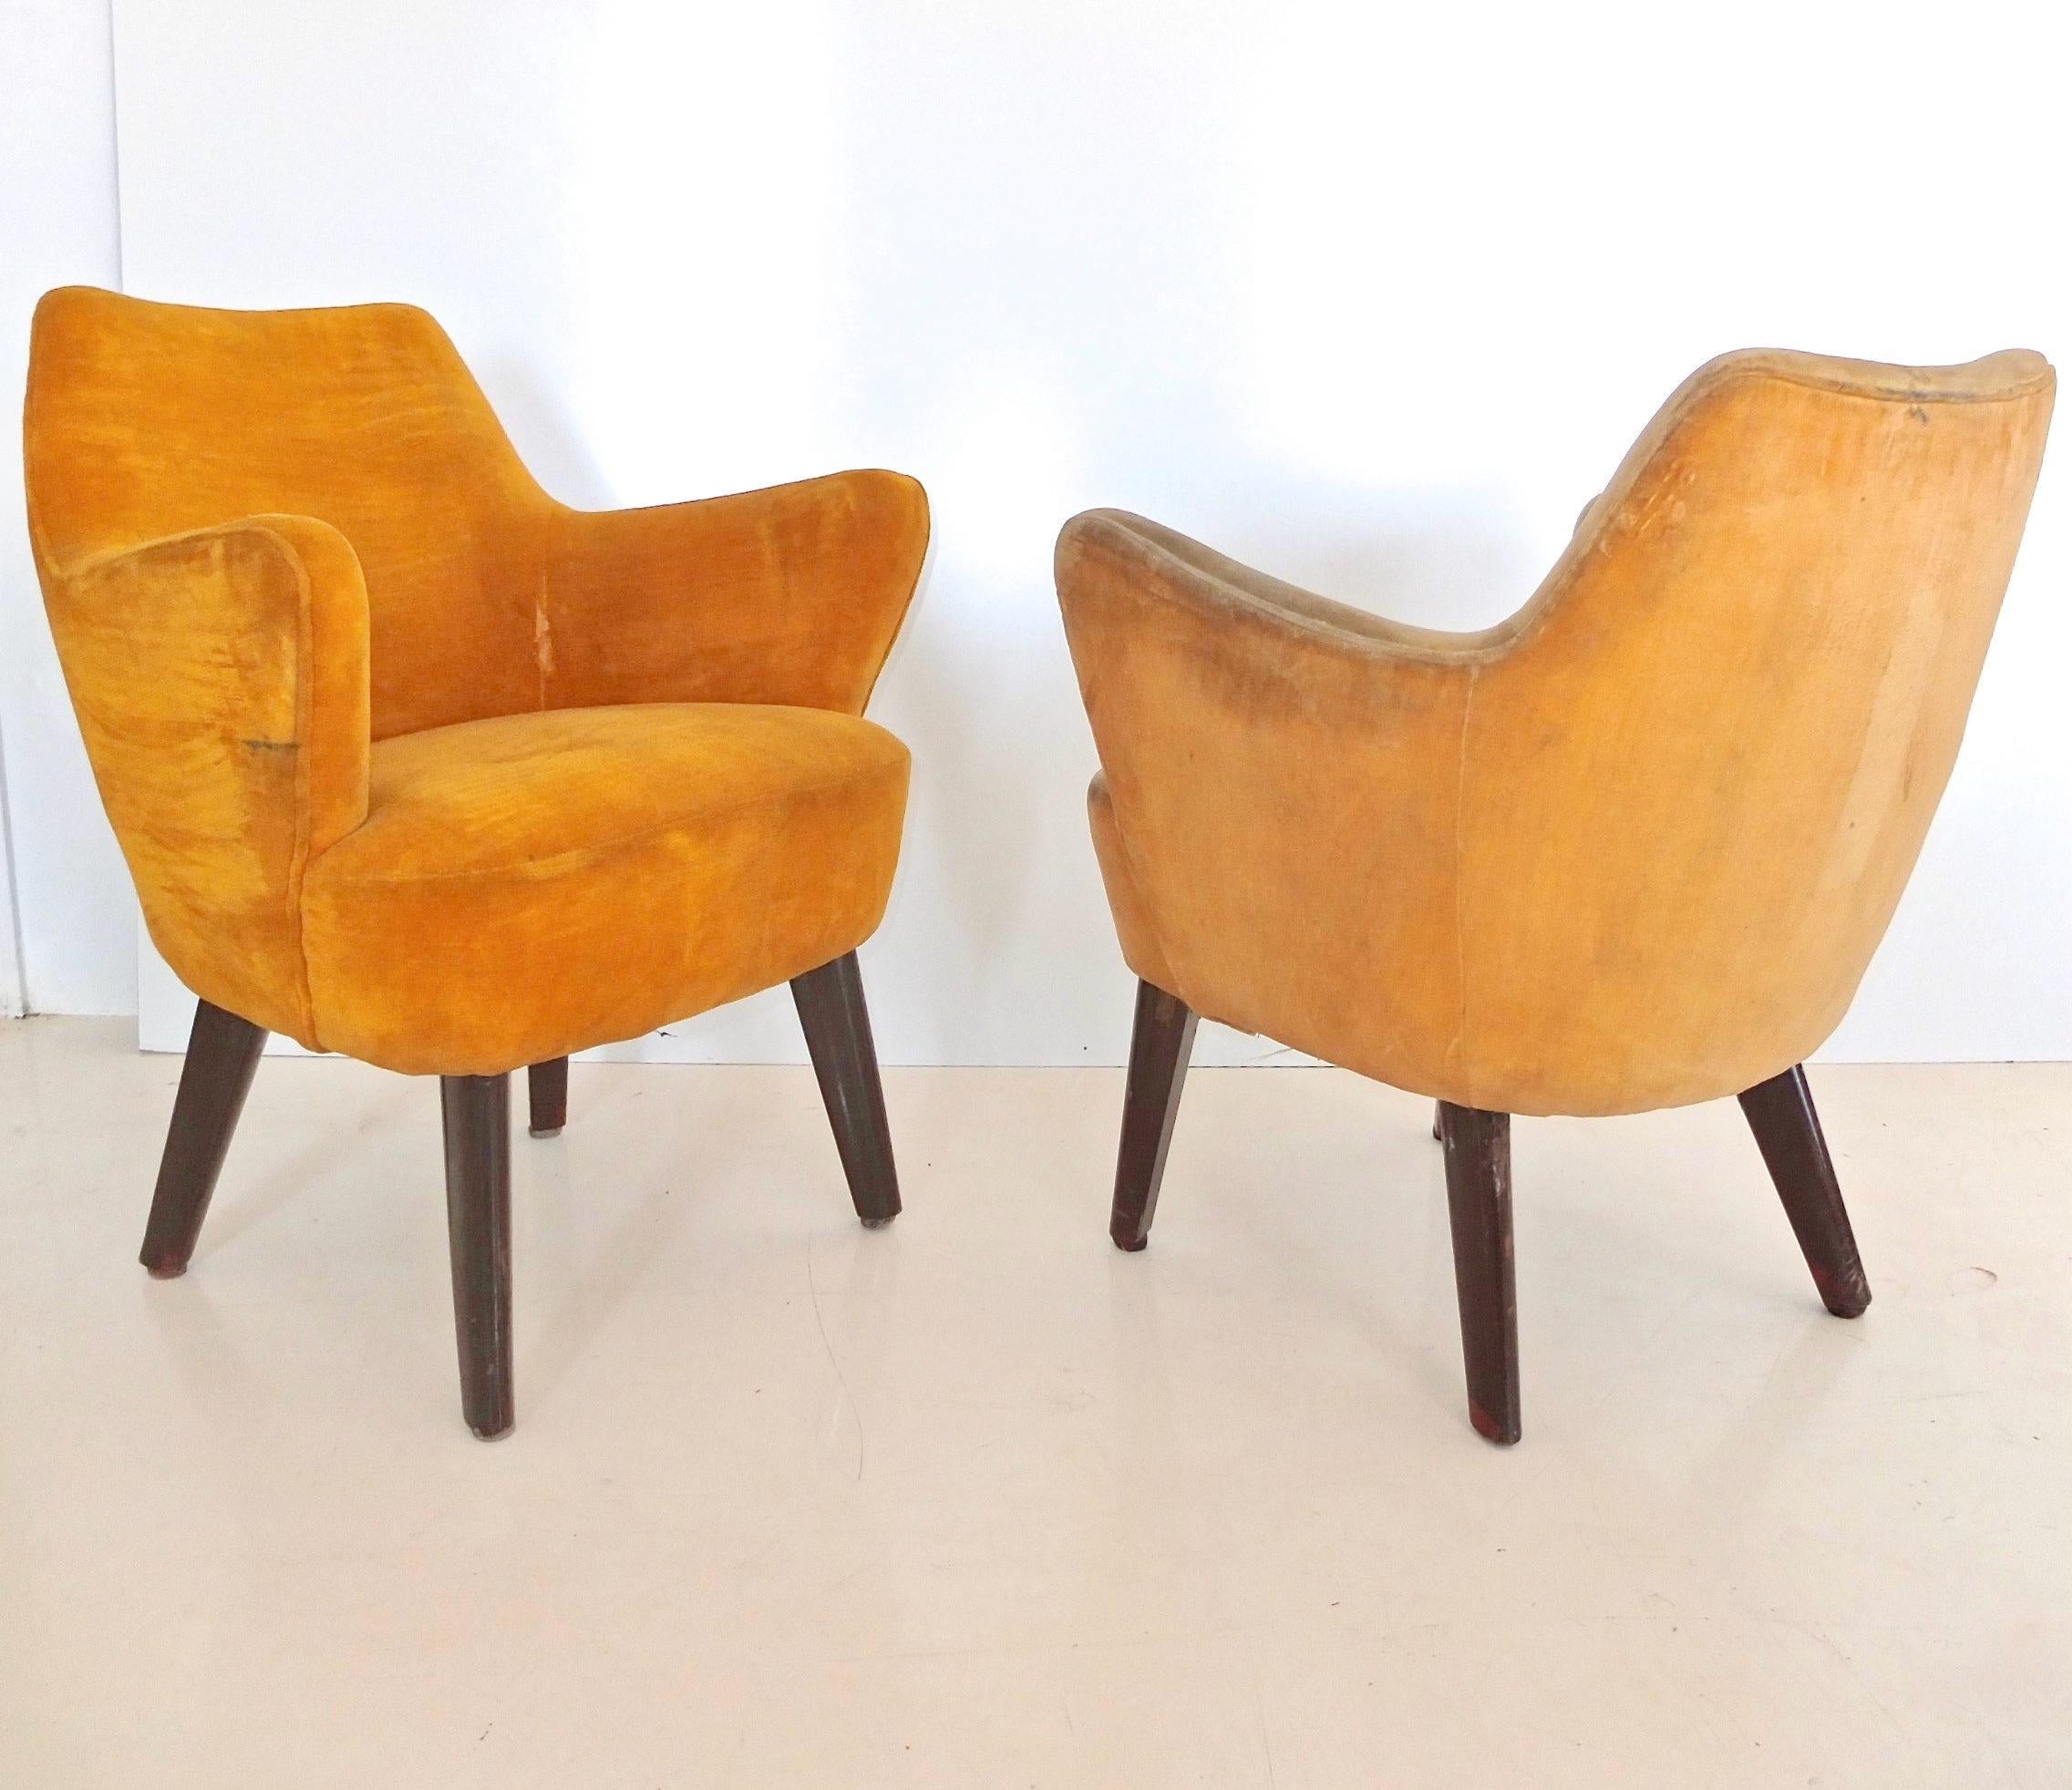 Gio Ponti Chairs from Augustus Ocean Liner - Pairs X3 For Sale 4